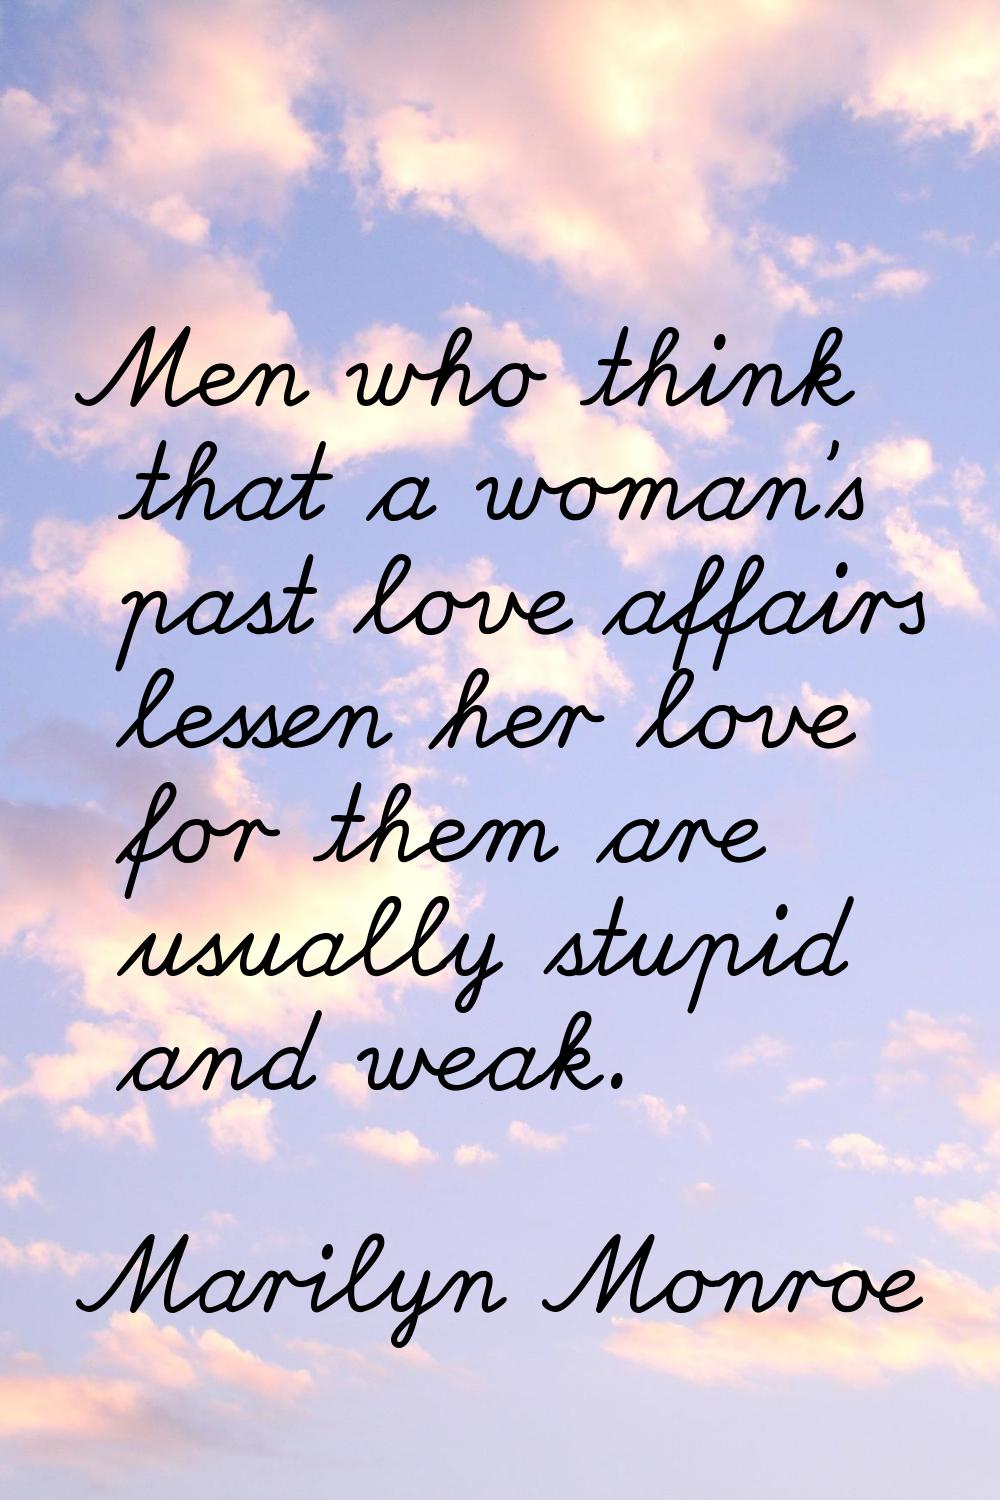 Men who think that a woman's past love affairs lessen her love for them are usually stupid and weak